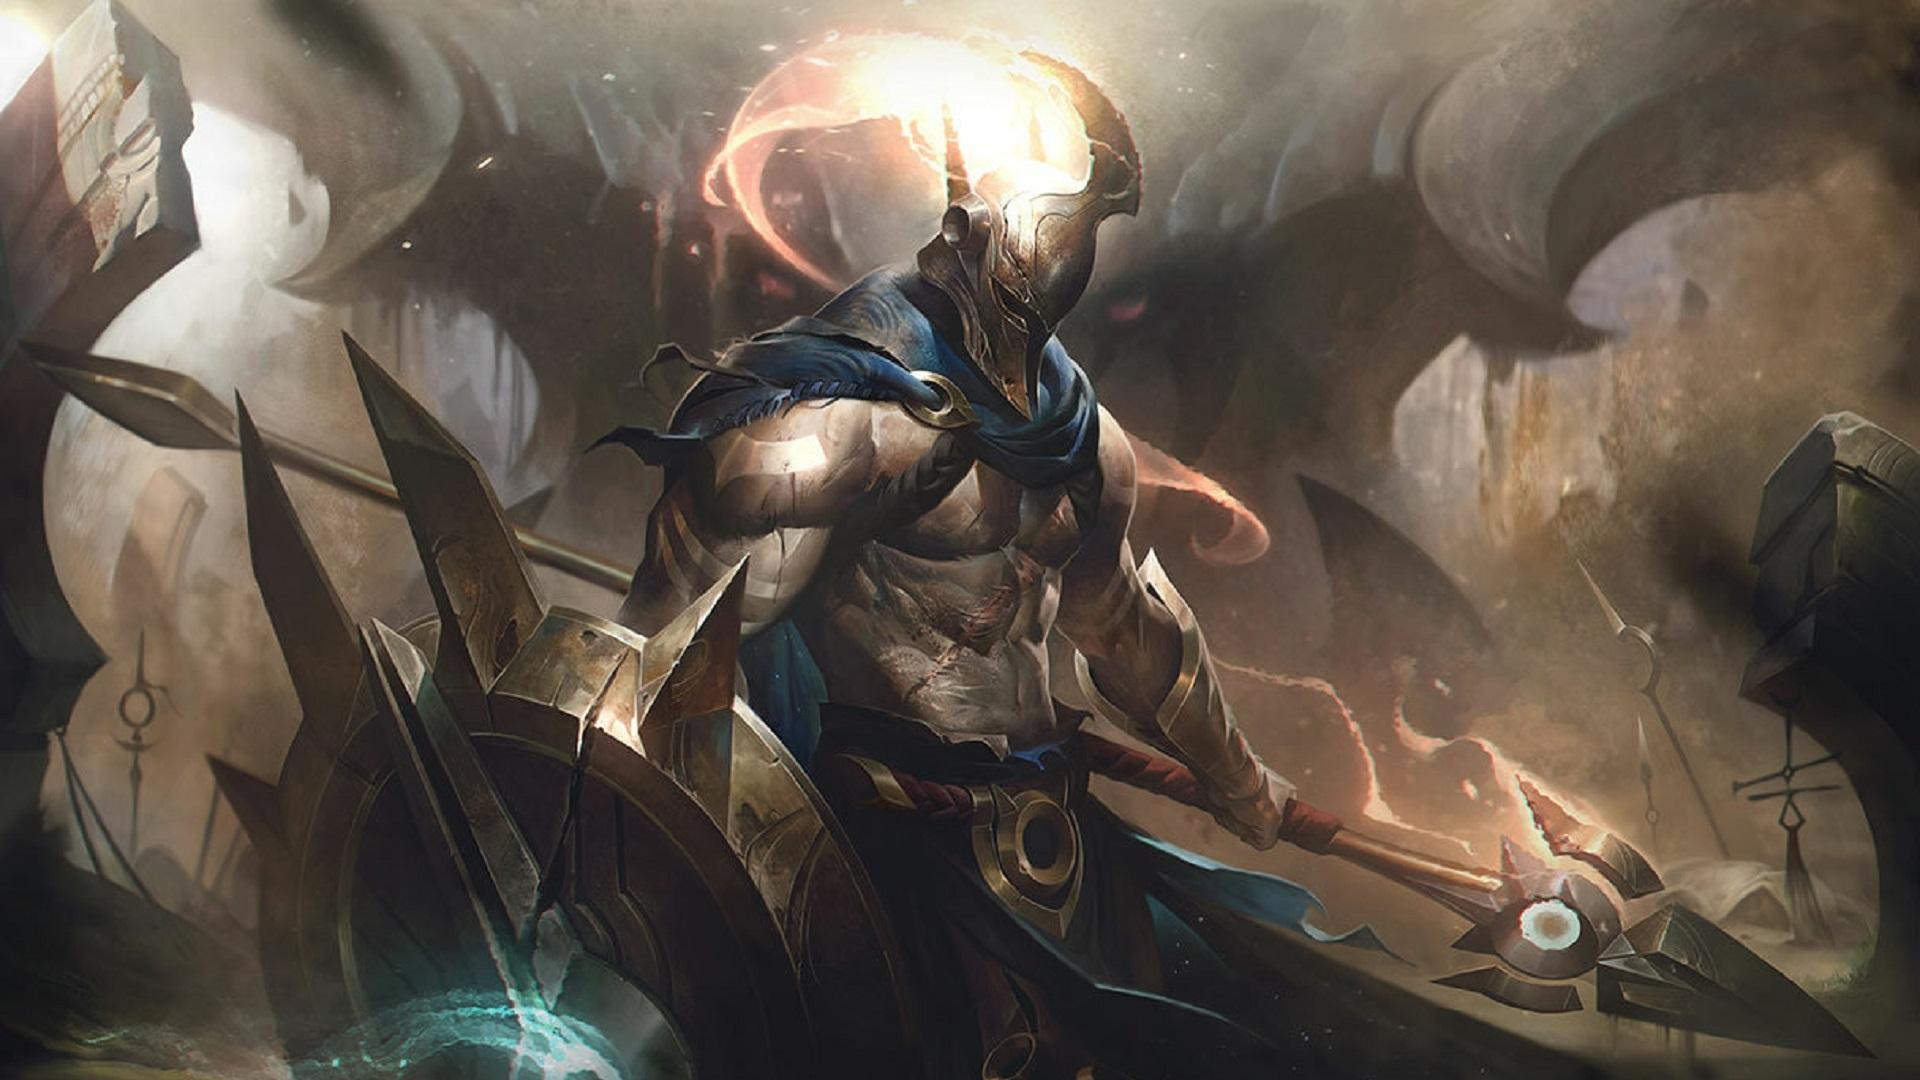 League of Legends patch 12.14 complete preview: All expected